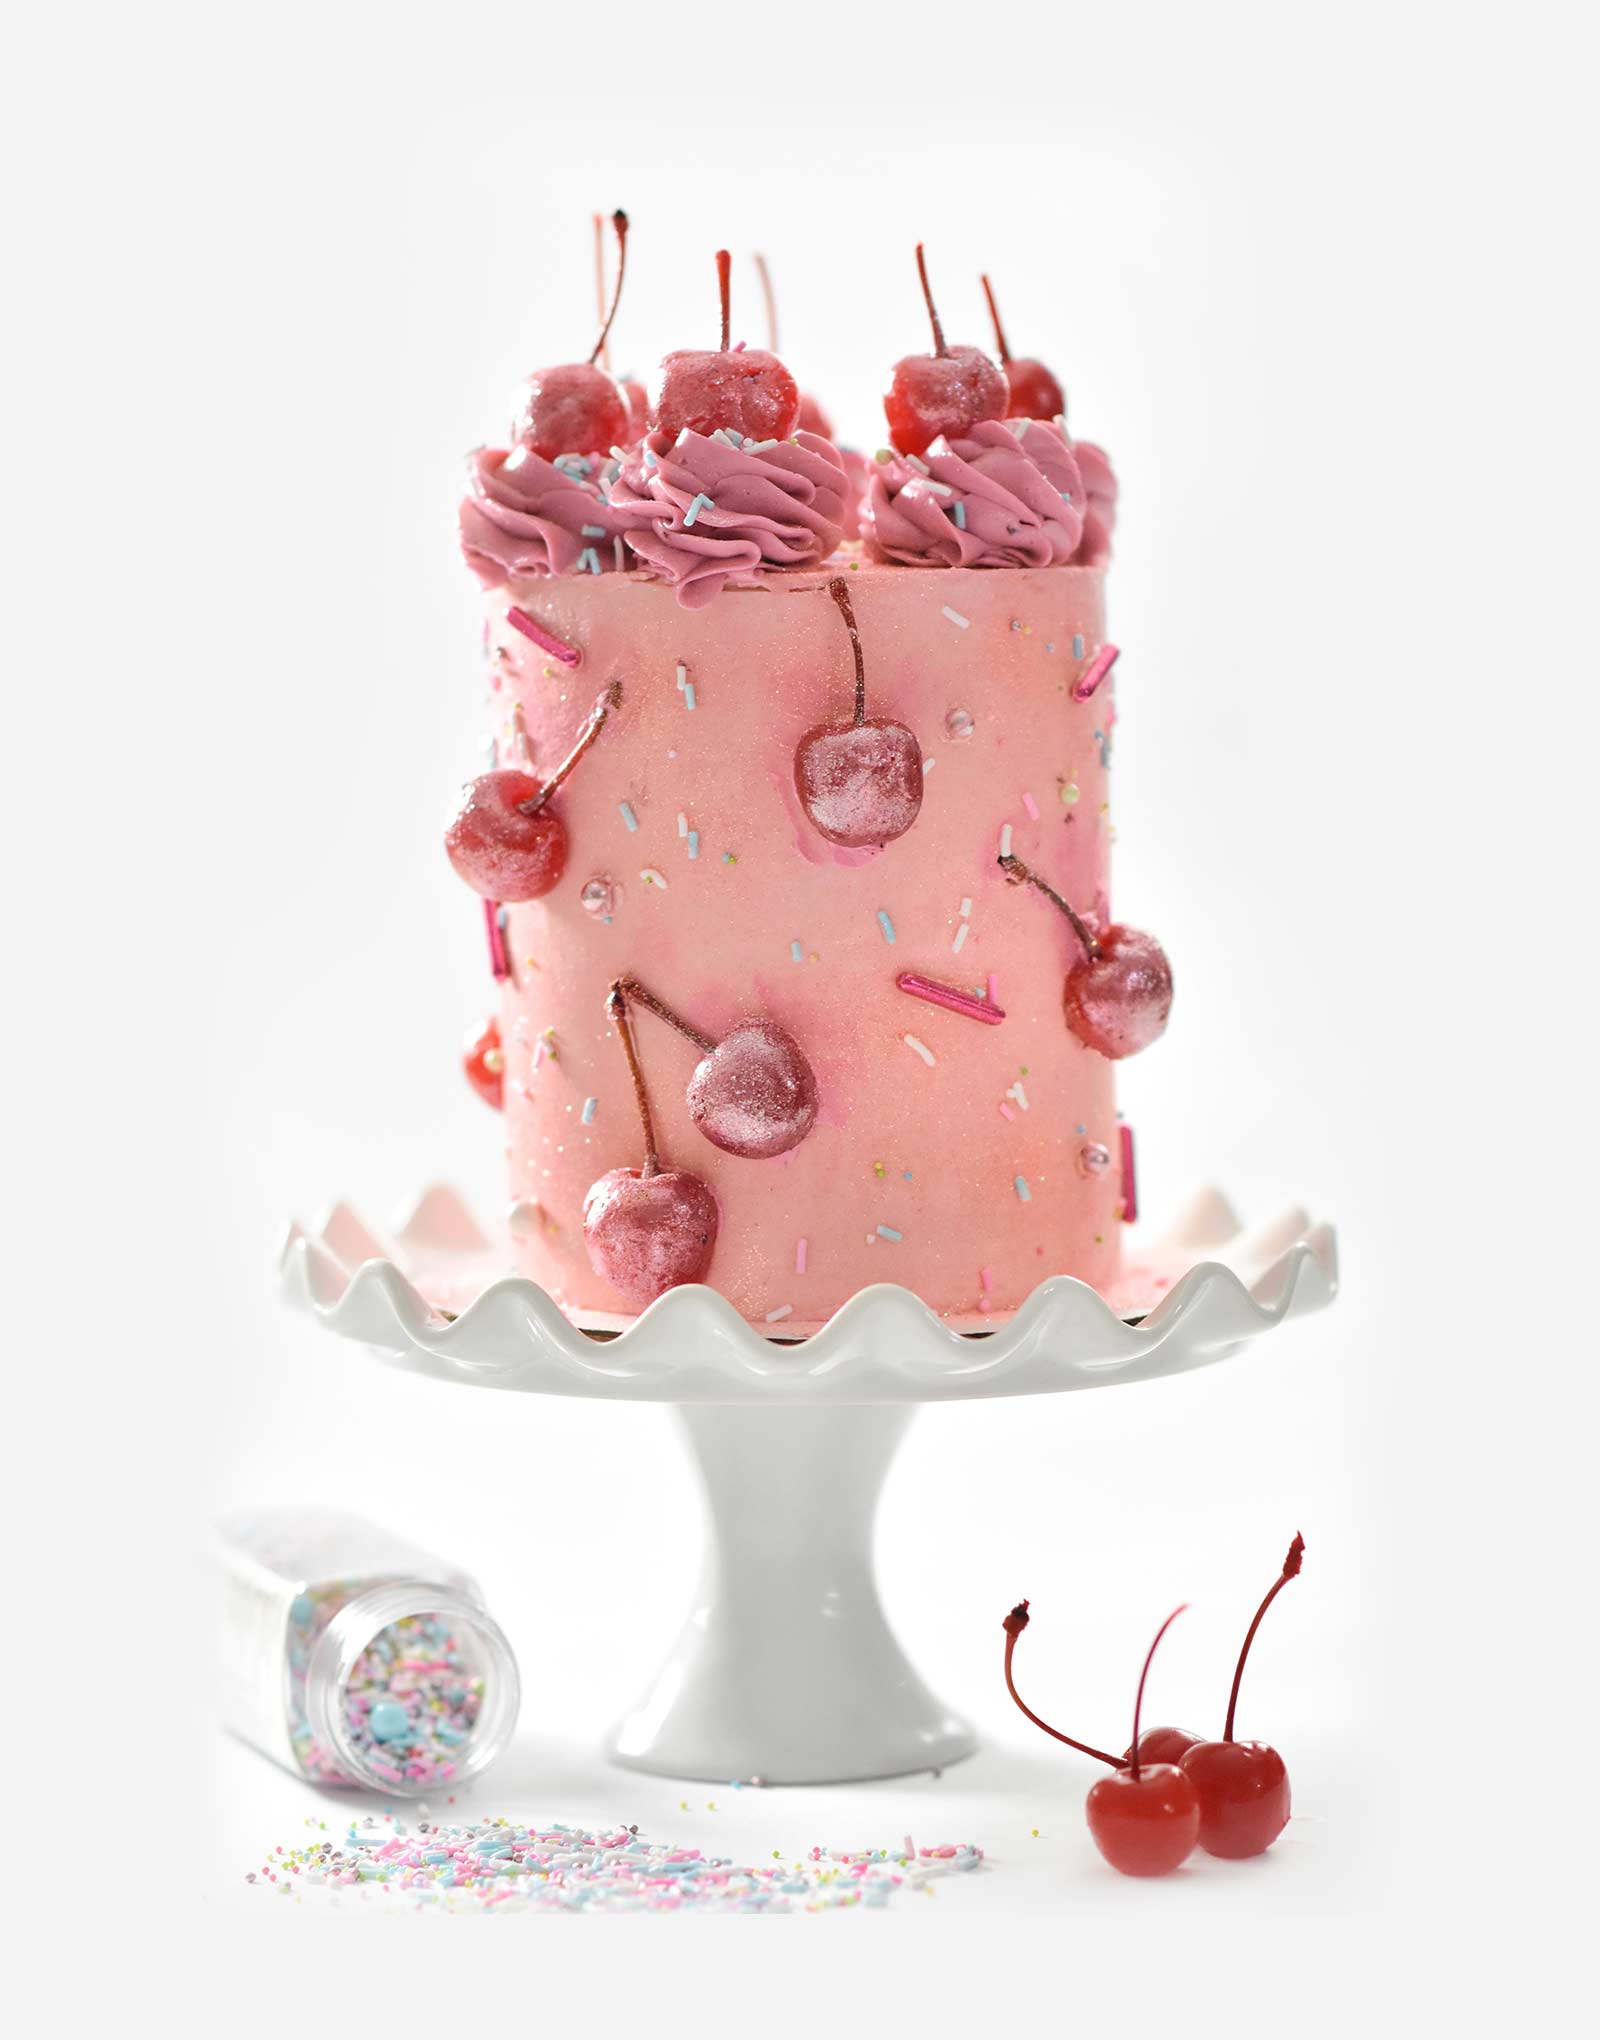 Cake with Cherry Topping